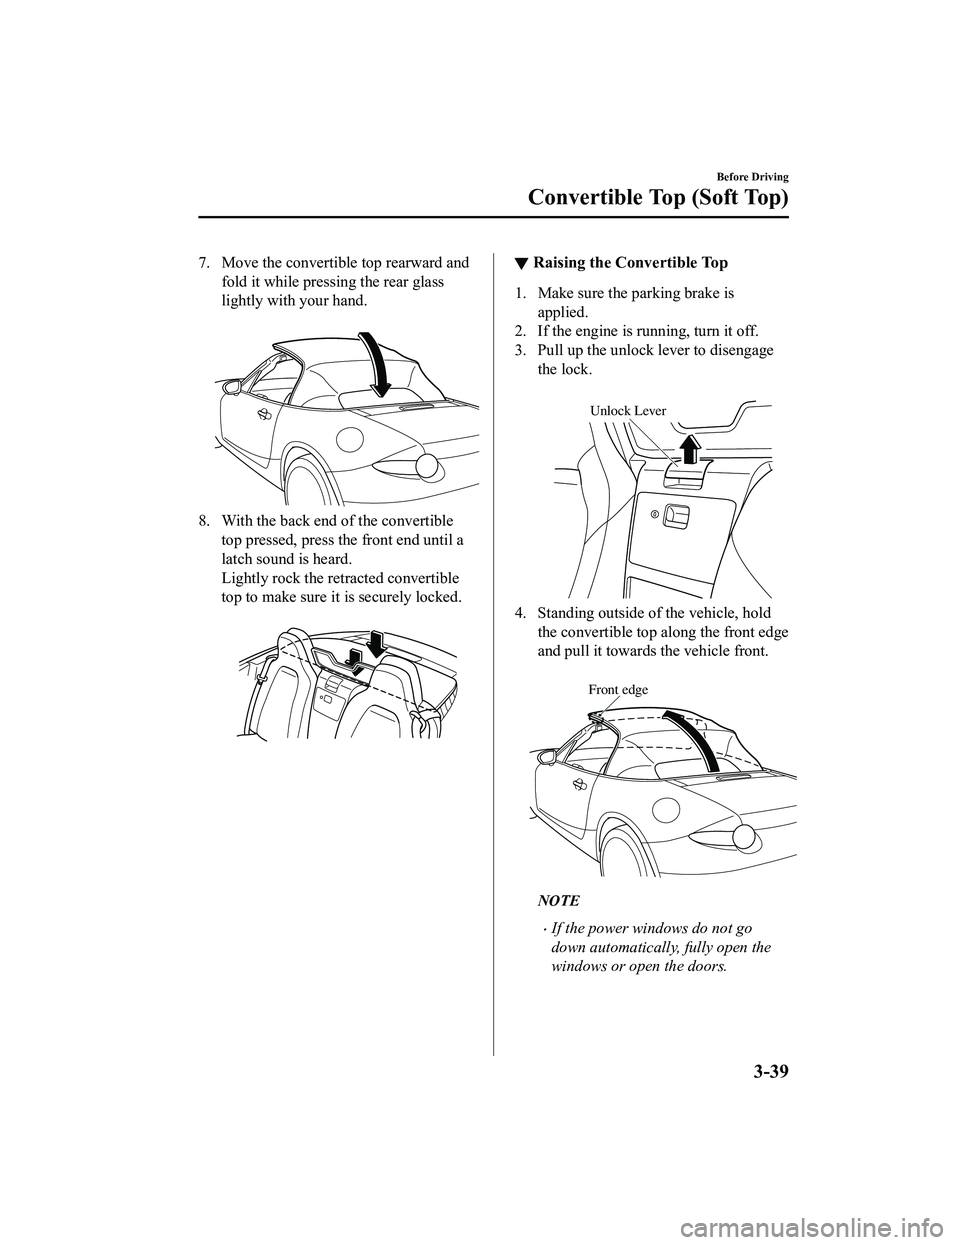 MAZDA MODEL MX-5 MIATA RF 2020  Owners Manual 7. Move the convertible top rearward andfold it while pres sing the rear glass
lightly with your hand.
 
8. With the back end of the convertible top pressed, press the front end until a
latch sound is